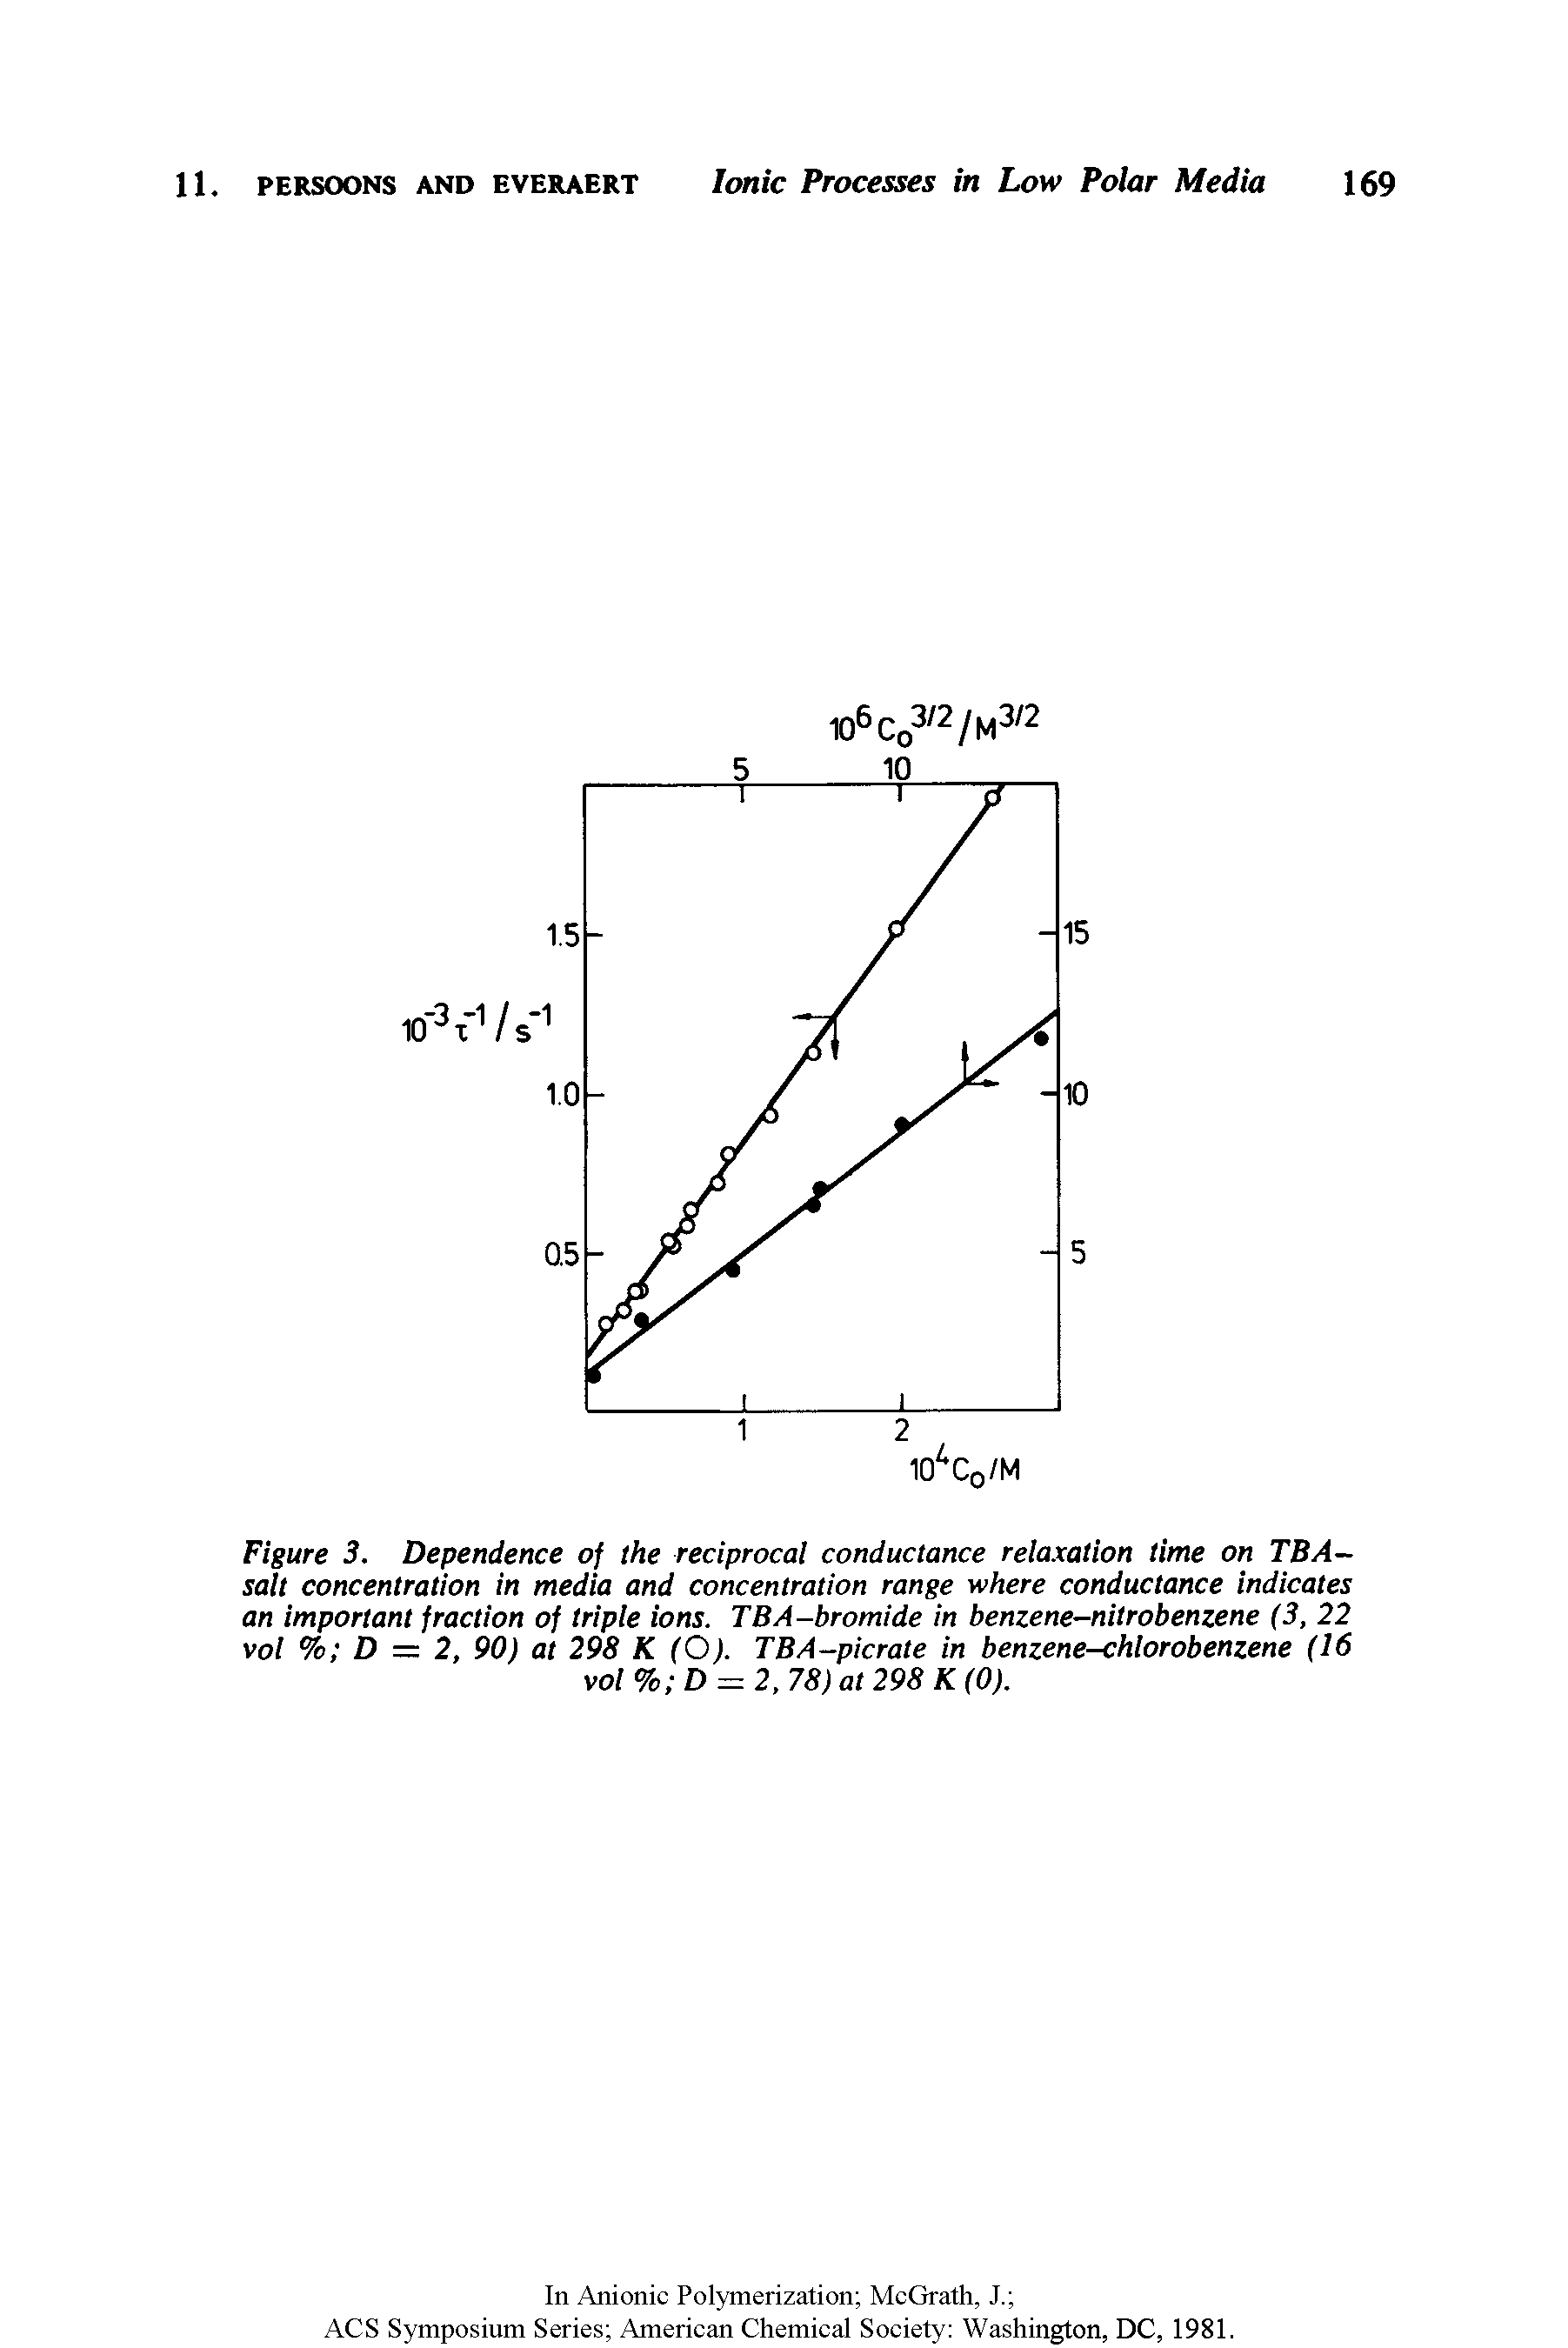 Figure 3. Dependence of the reciprocal conductance relaxation time on TBA— salt concentration in media and concentration range where conductance indicates an important fraction of triple ions. TBA-bromide in benzene-nitrobenzene (3, 22 vol % D = 2, 90) at 298 ( ). TBA-picrate in benzene-chlorobenzene (16 vol % D = 2, 78) at 298 (0).